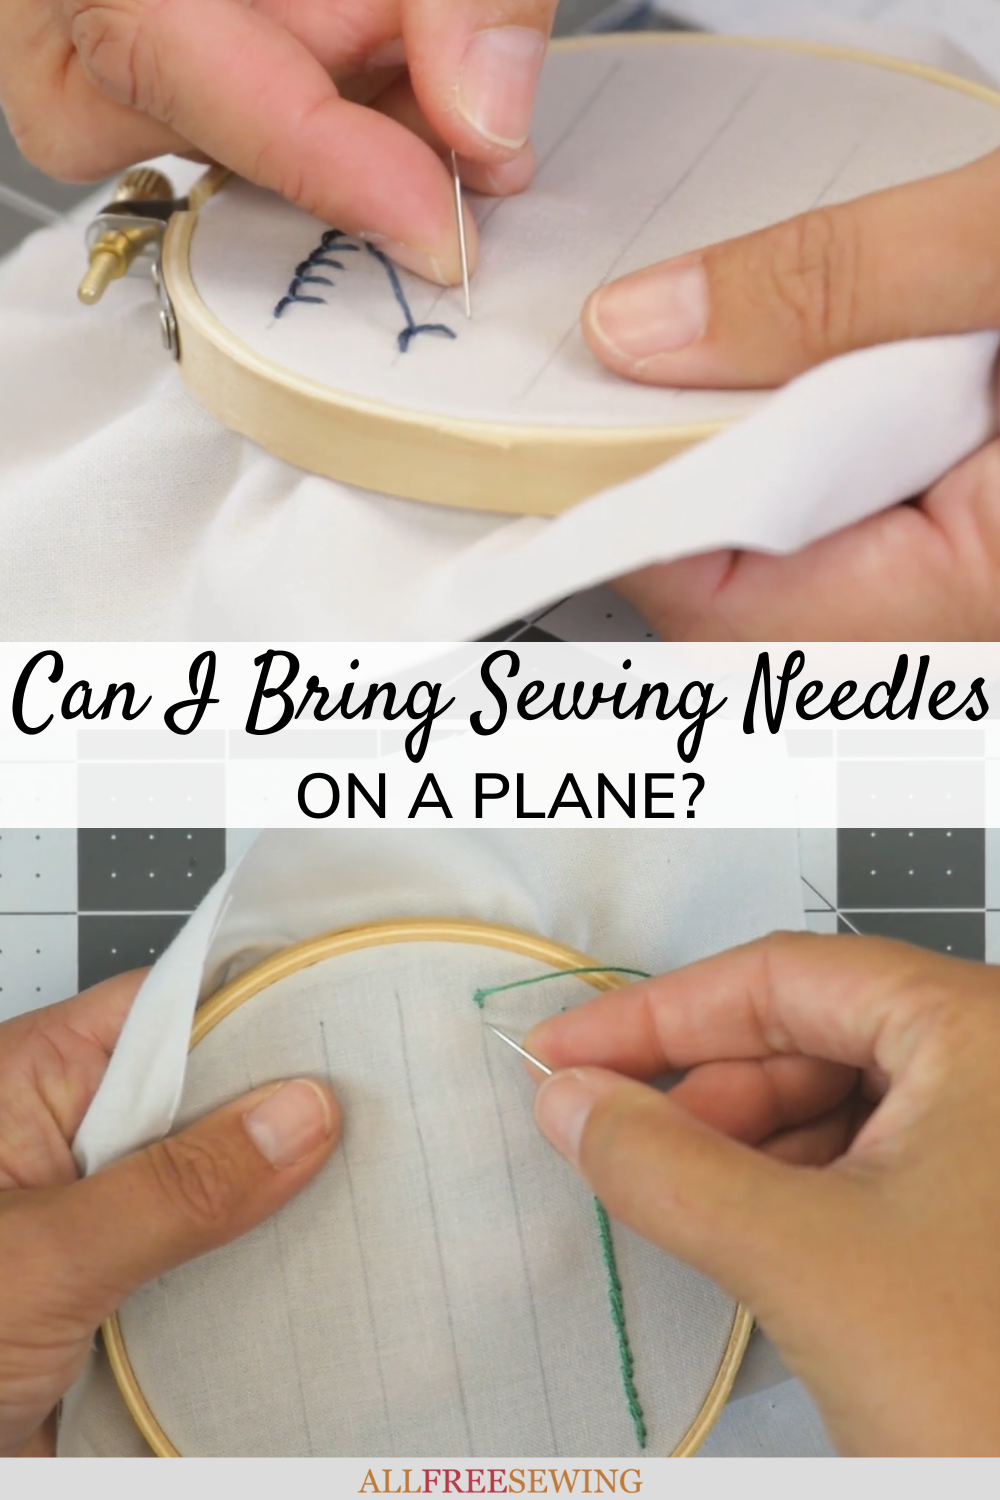 Can You Bring Knitting Needles (and Other Craft Tools) on an Airplane?